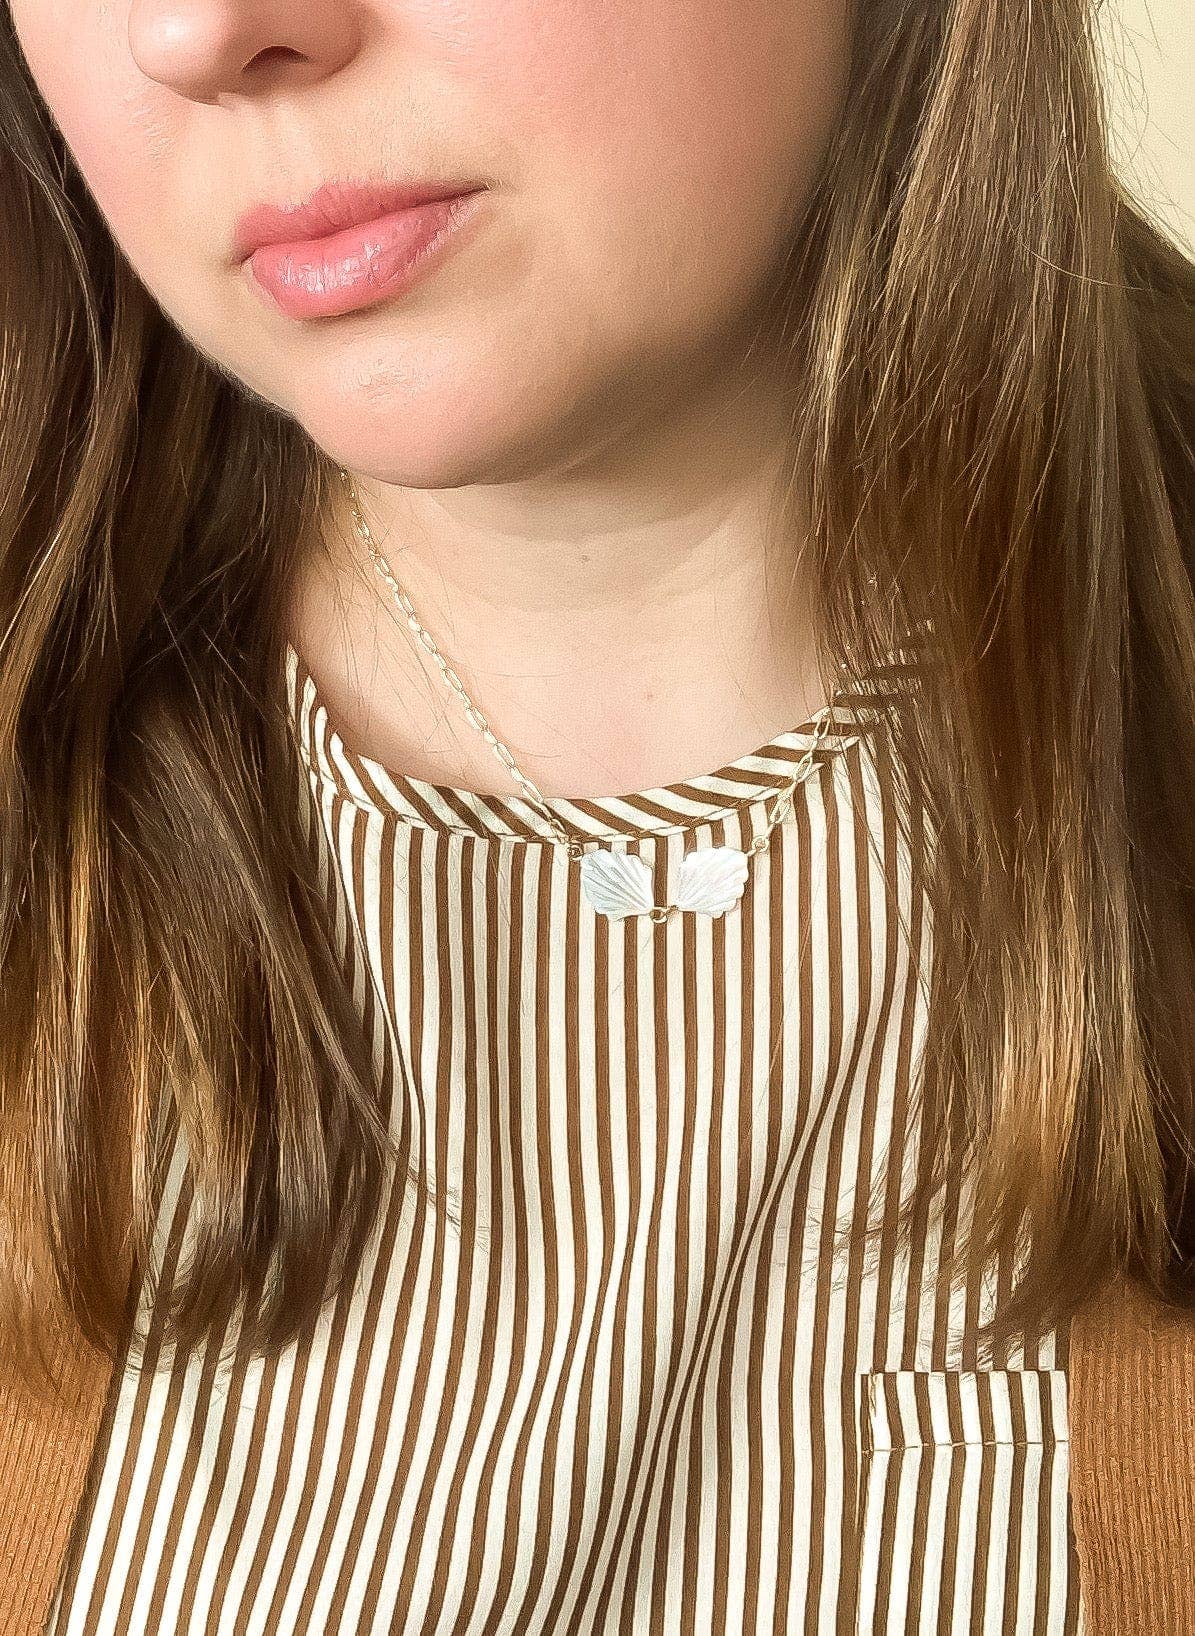 Mother of Pearl Double Shell Necklace: 17"